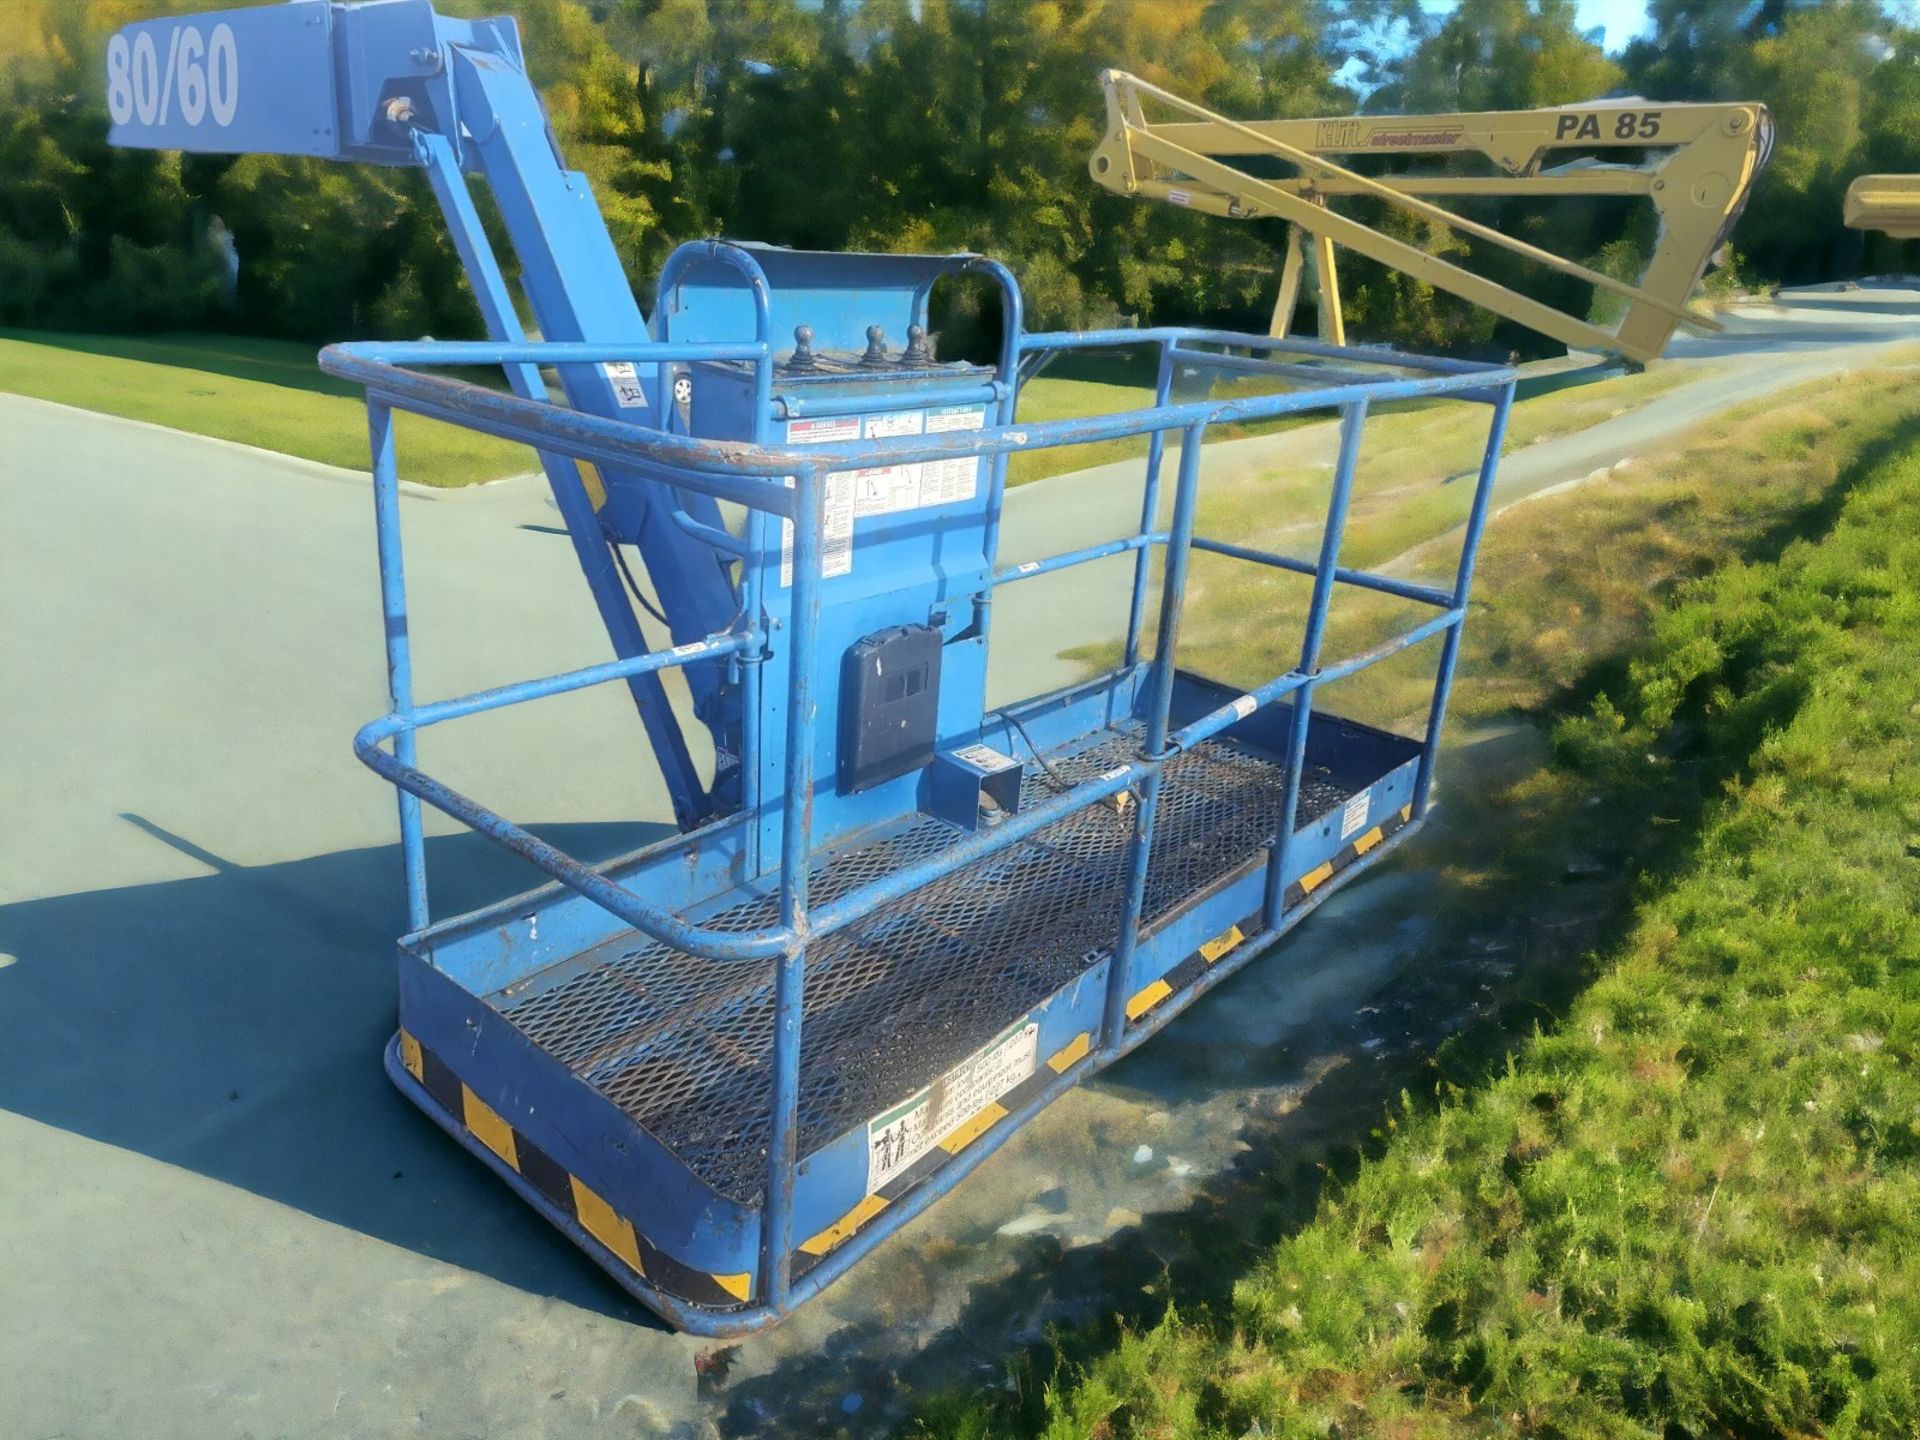 2003 GENIE G80-60 ACCESS LIFT - Image 3 of 4